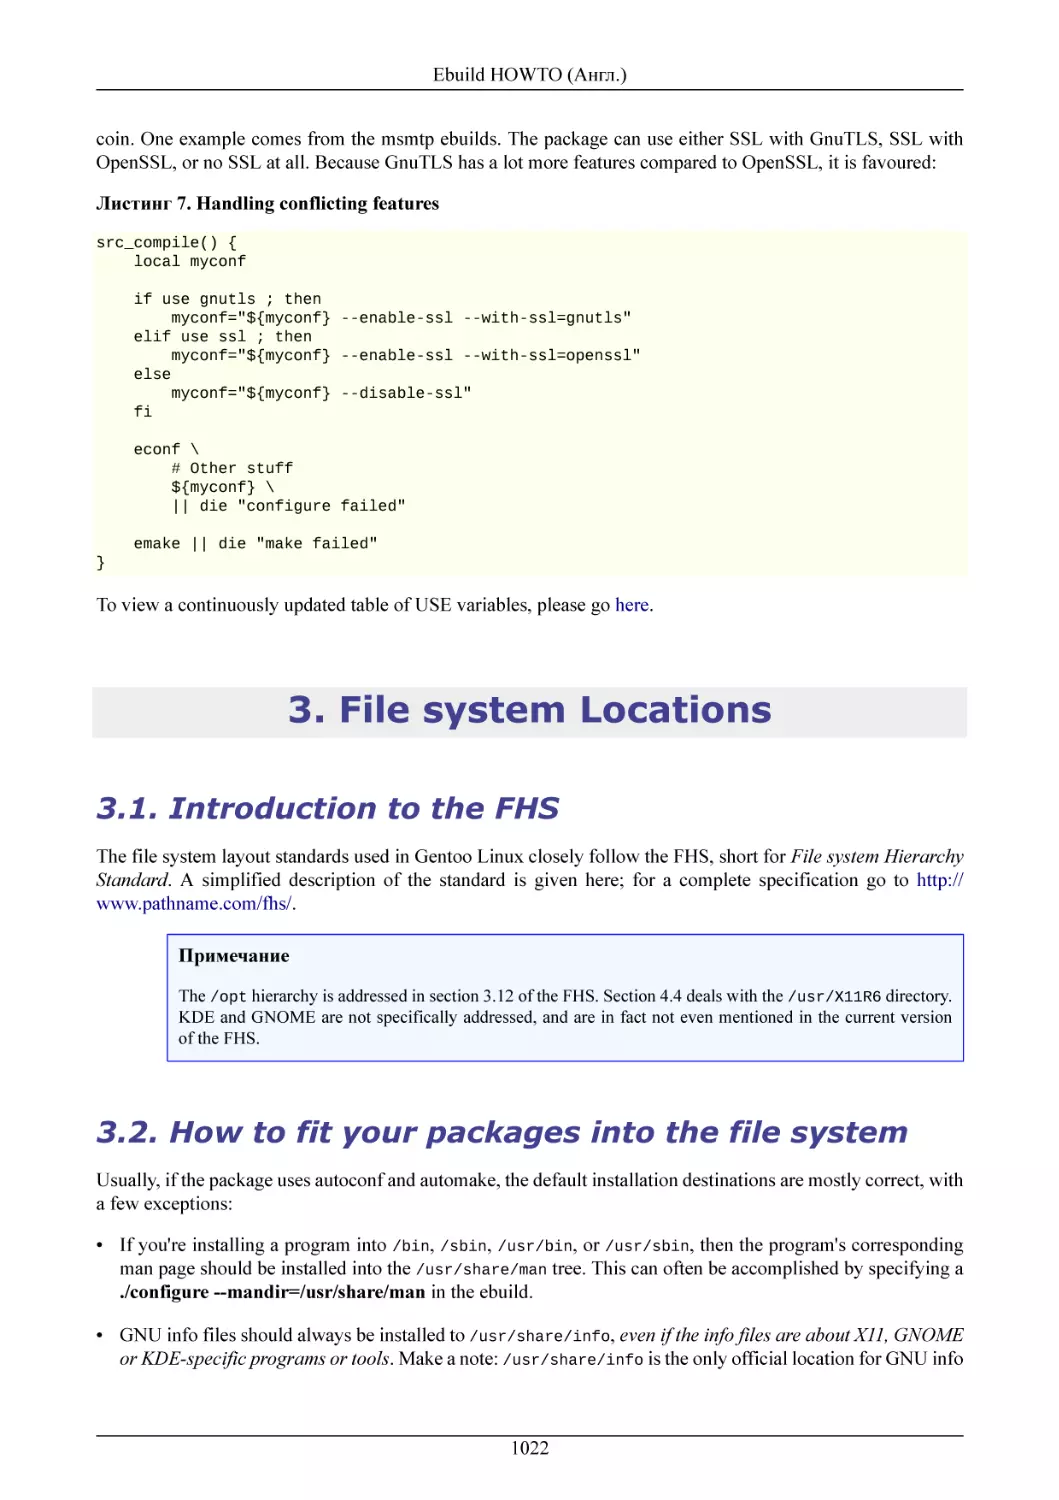 File system Locations
Introduction to the FHS
How to fit your packages into the file system